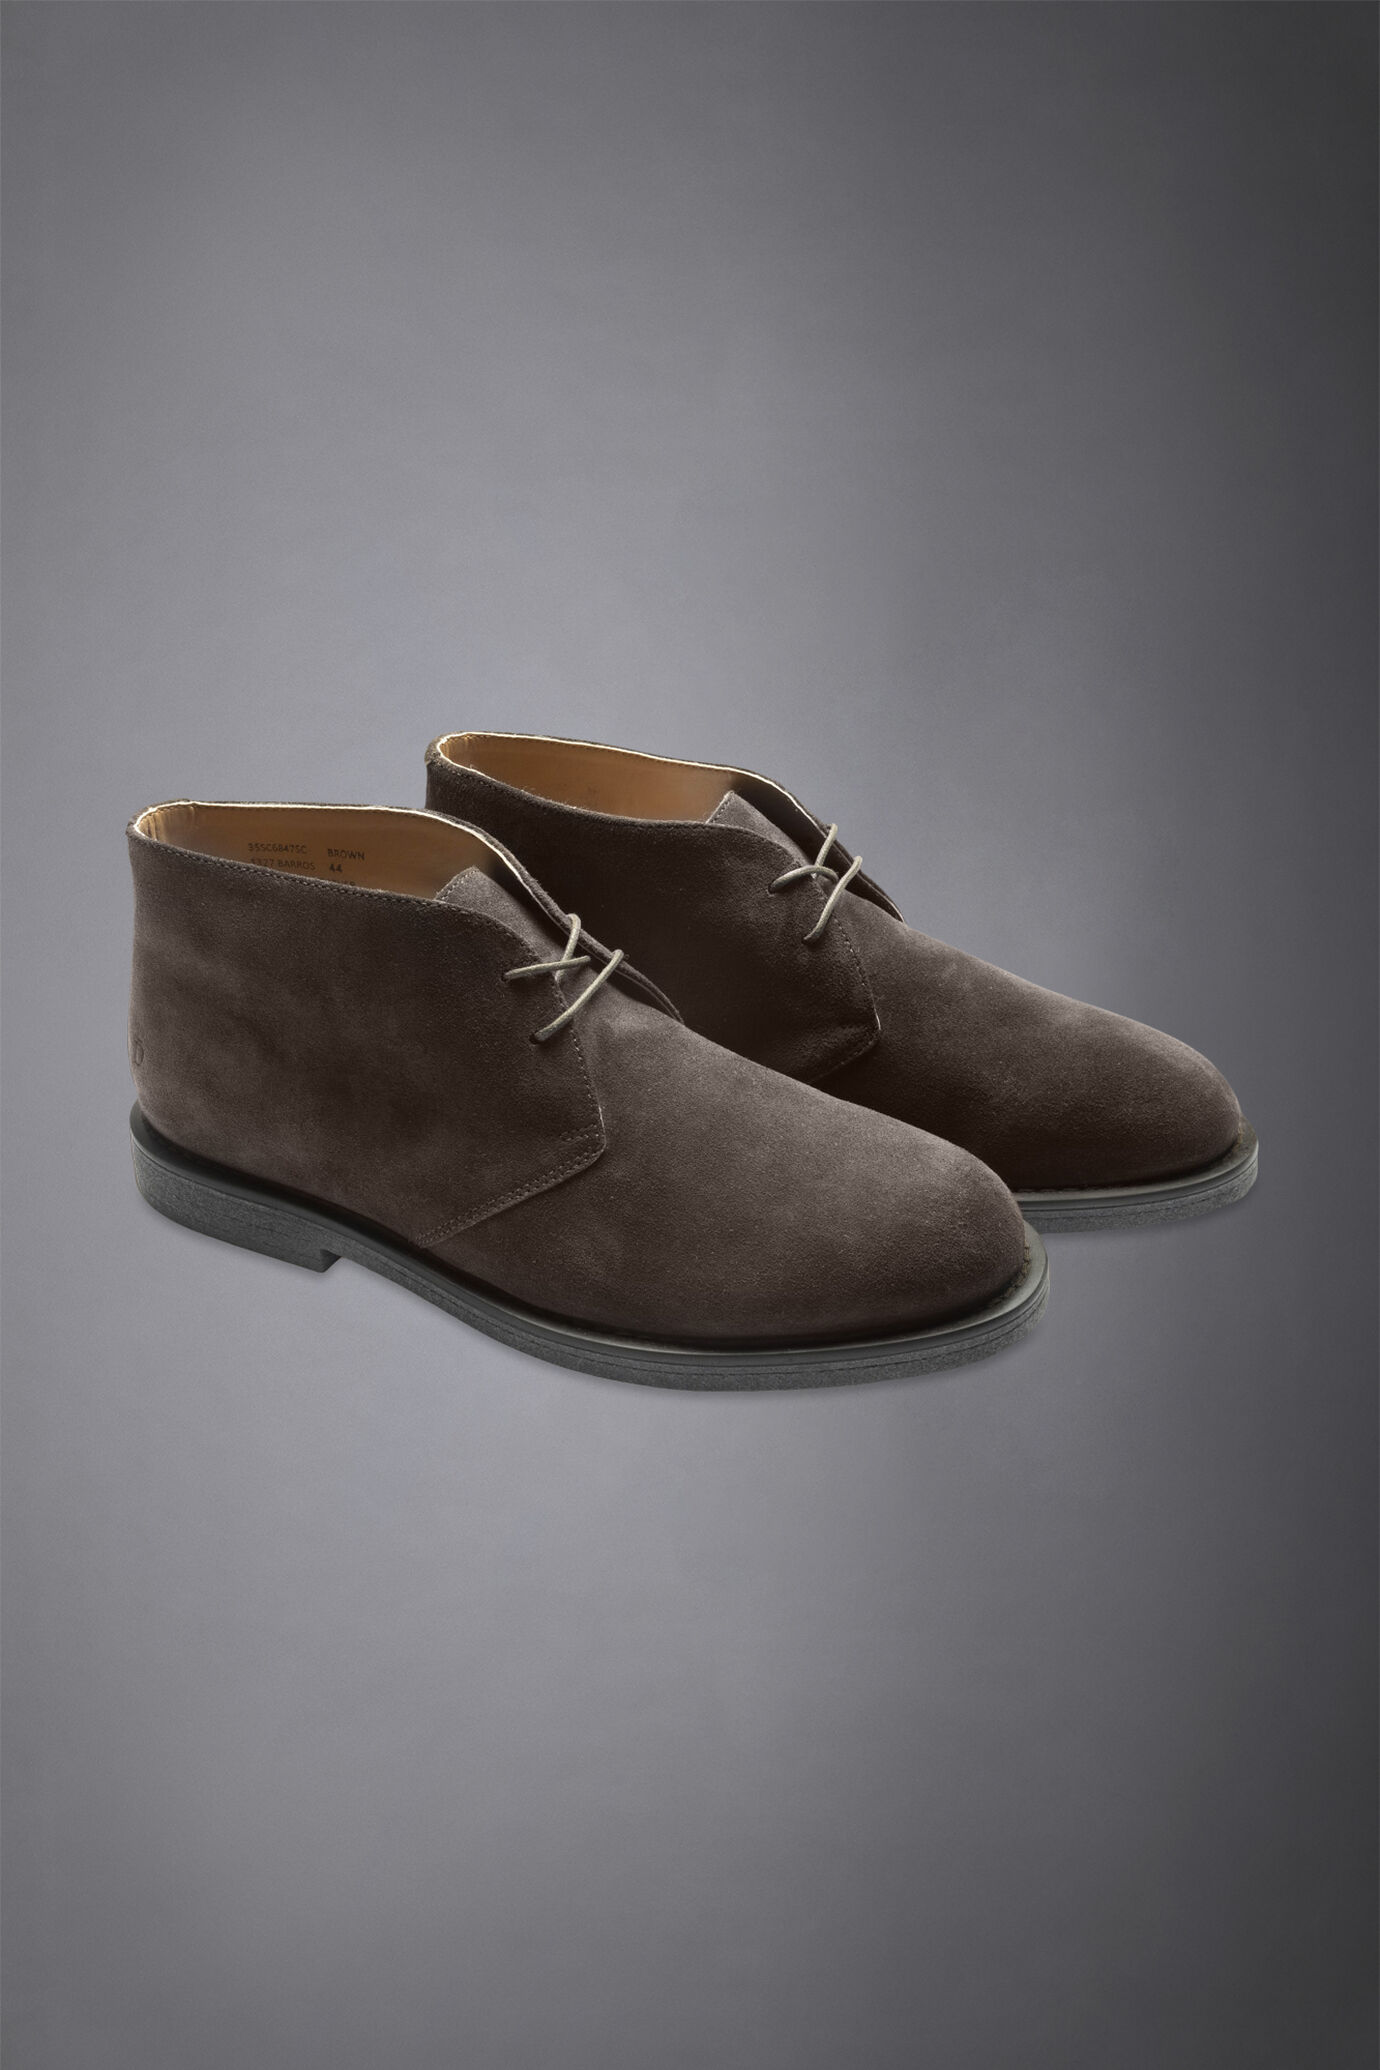 Men's desert boots 100% suede leather with rubber sole